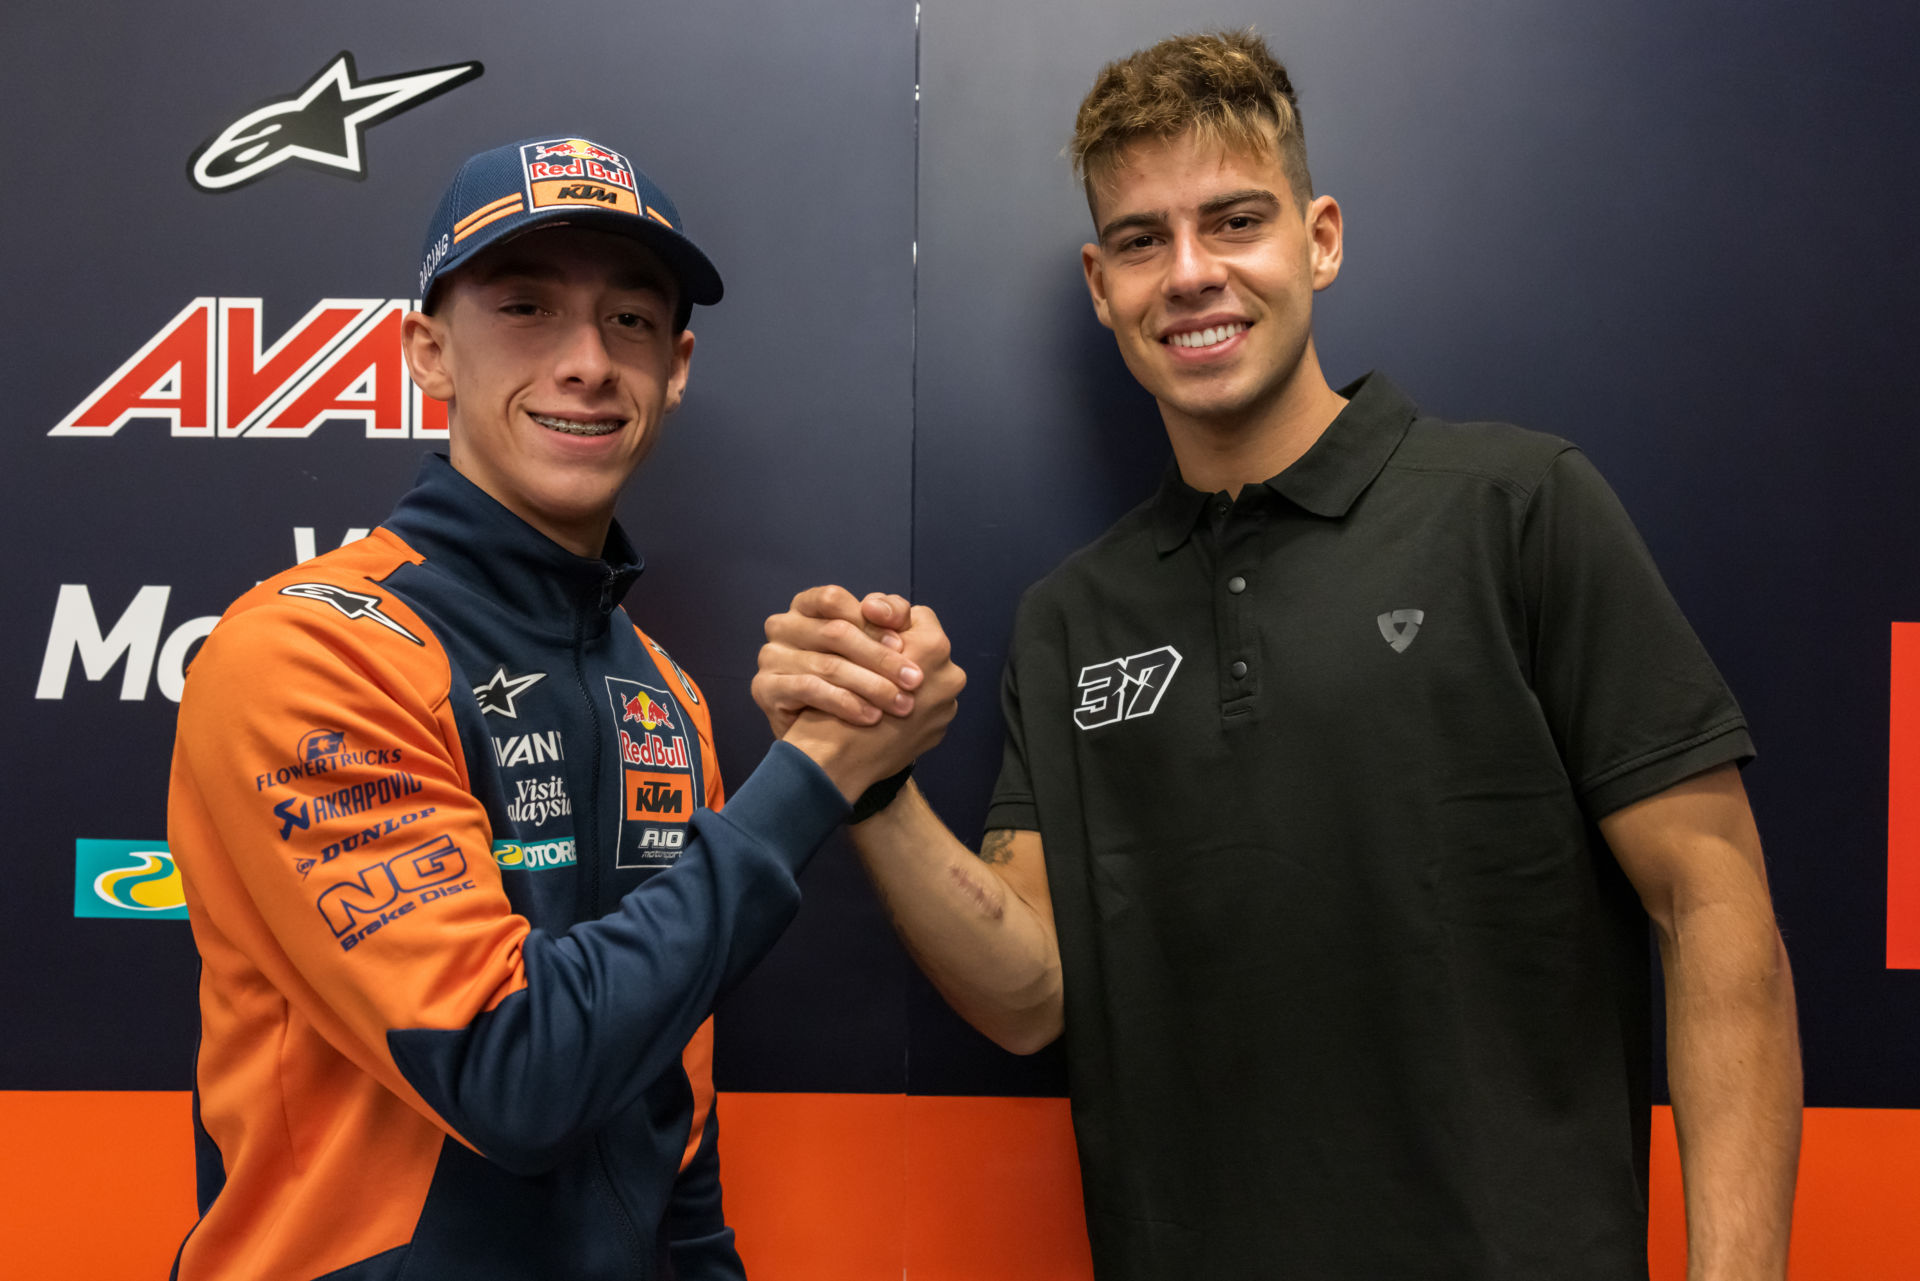 Pedro Acosta and Augusto Fernandez will ride for the Red Bull KTM Ajo team ...